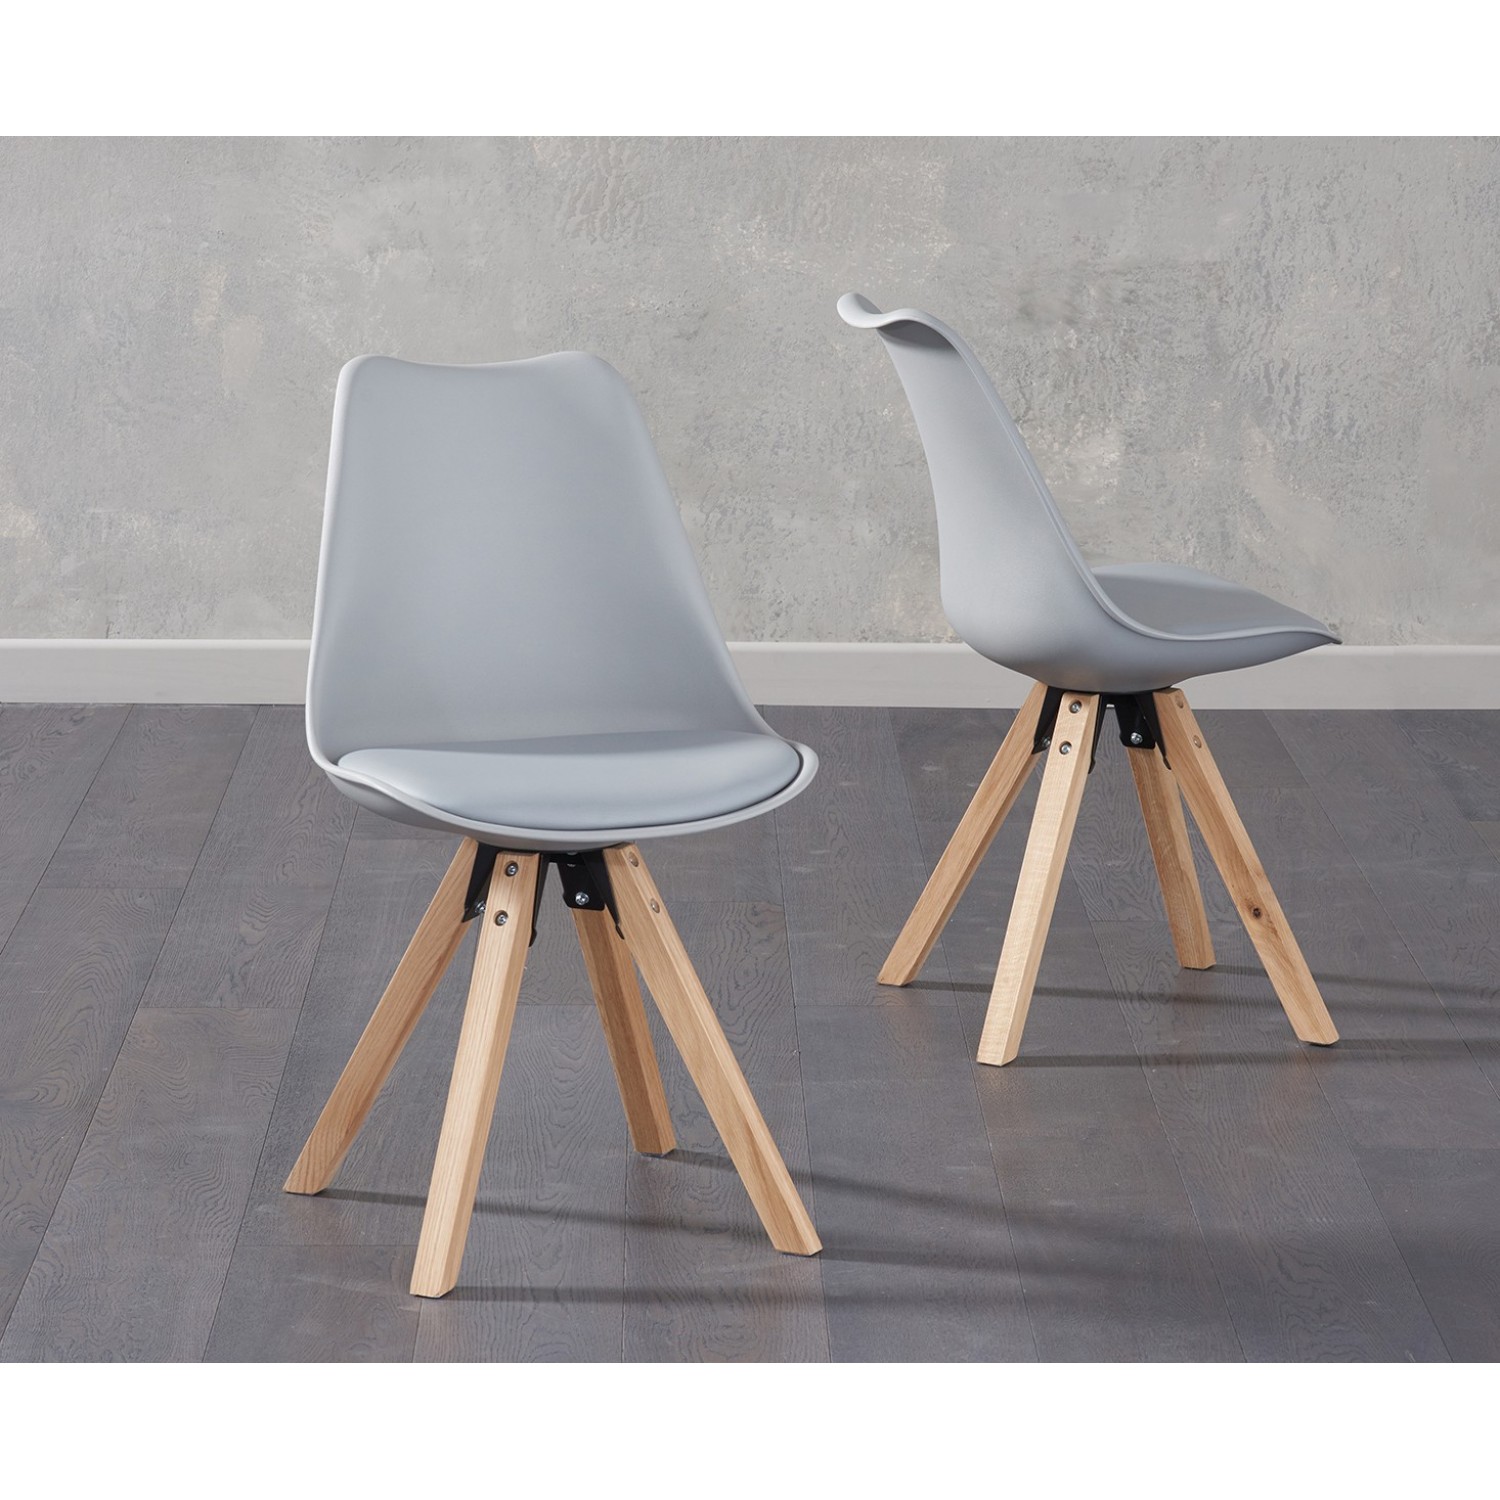 Olivier Square Wooden Leg Light Grey, Light Grey Dining Chairs Wooden Legs